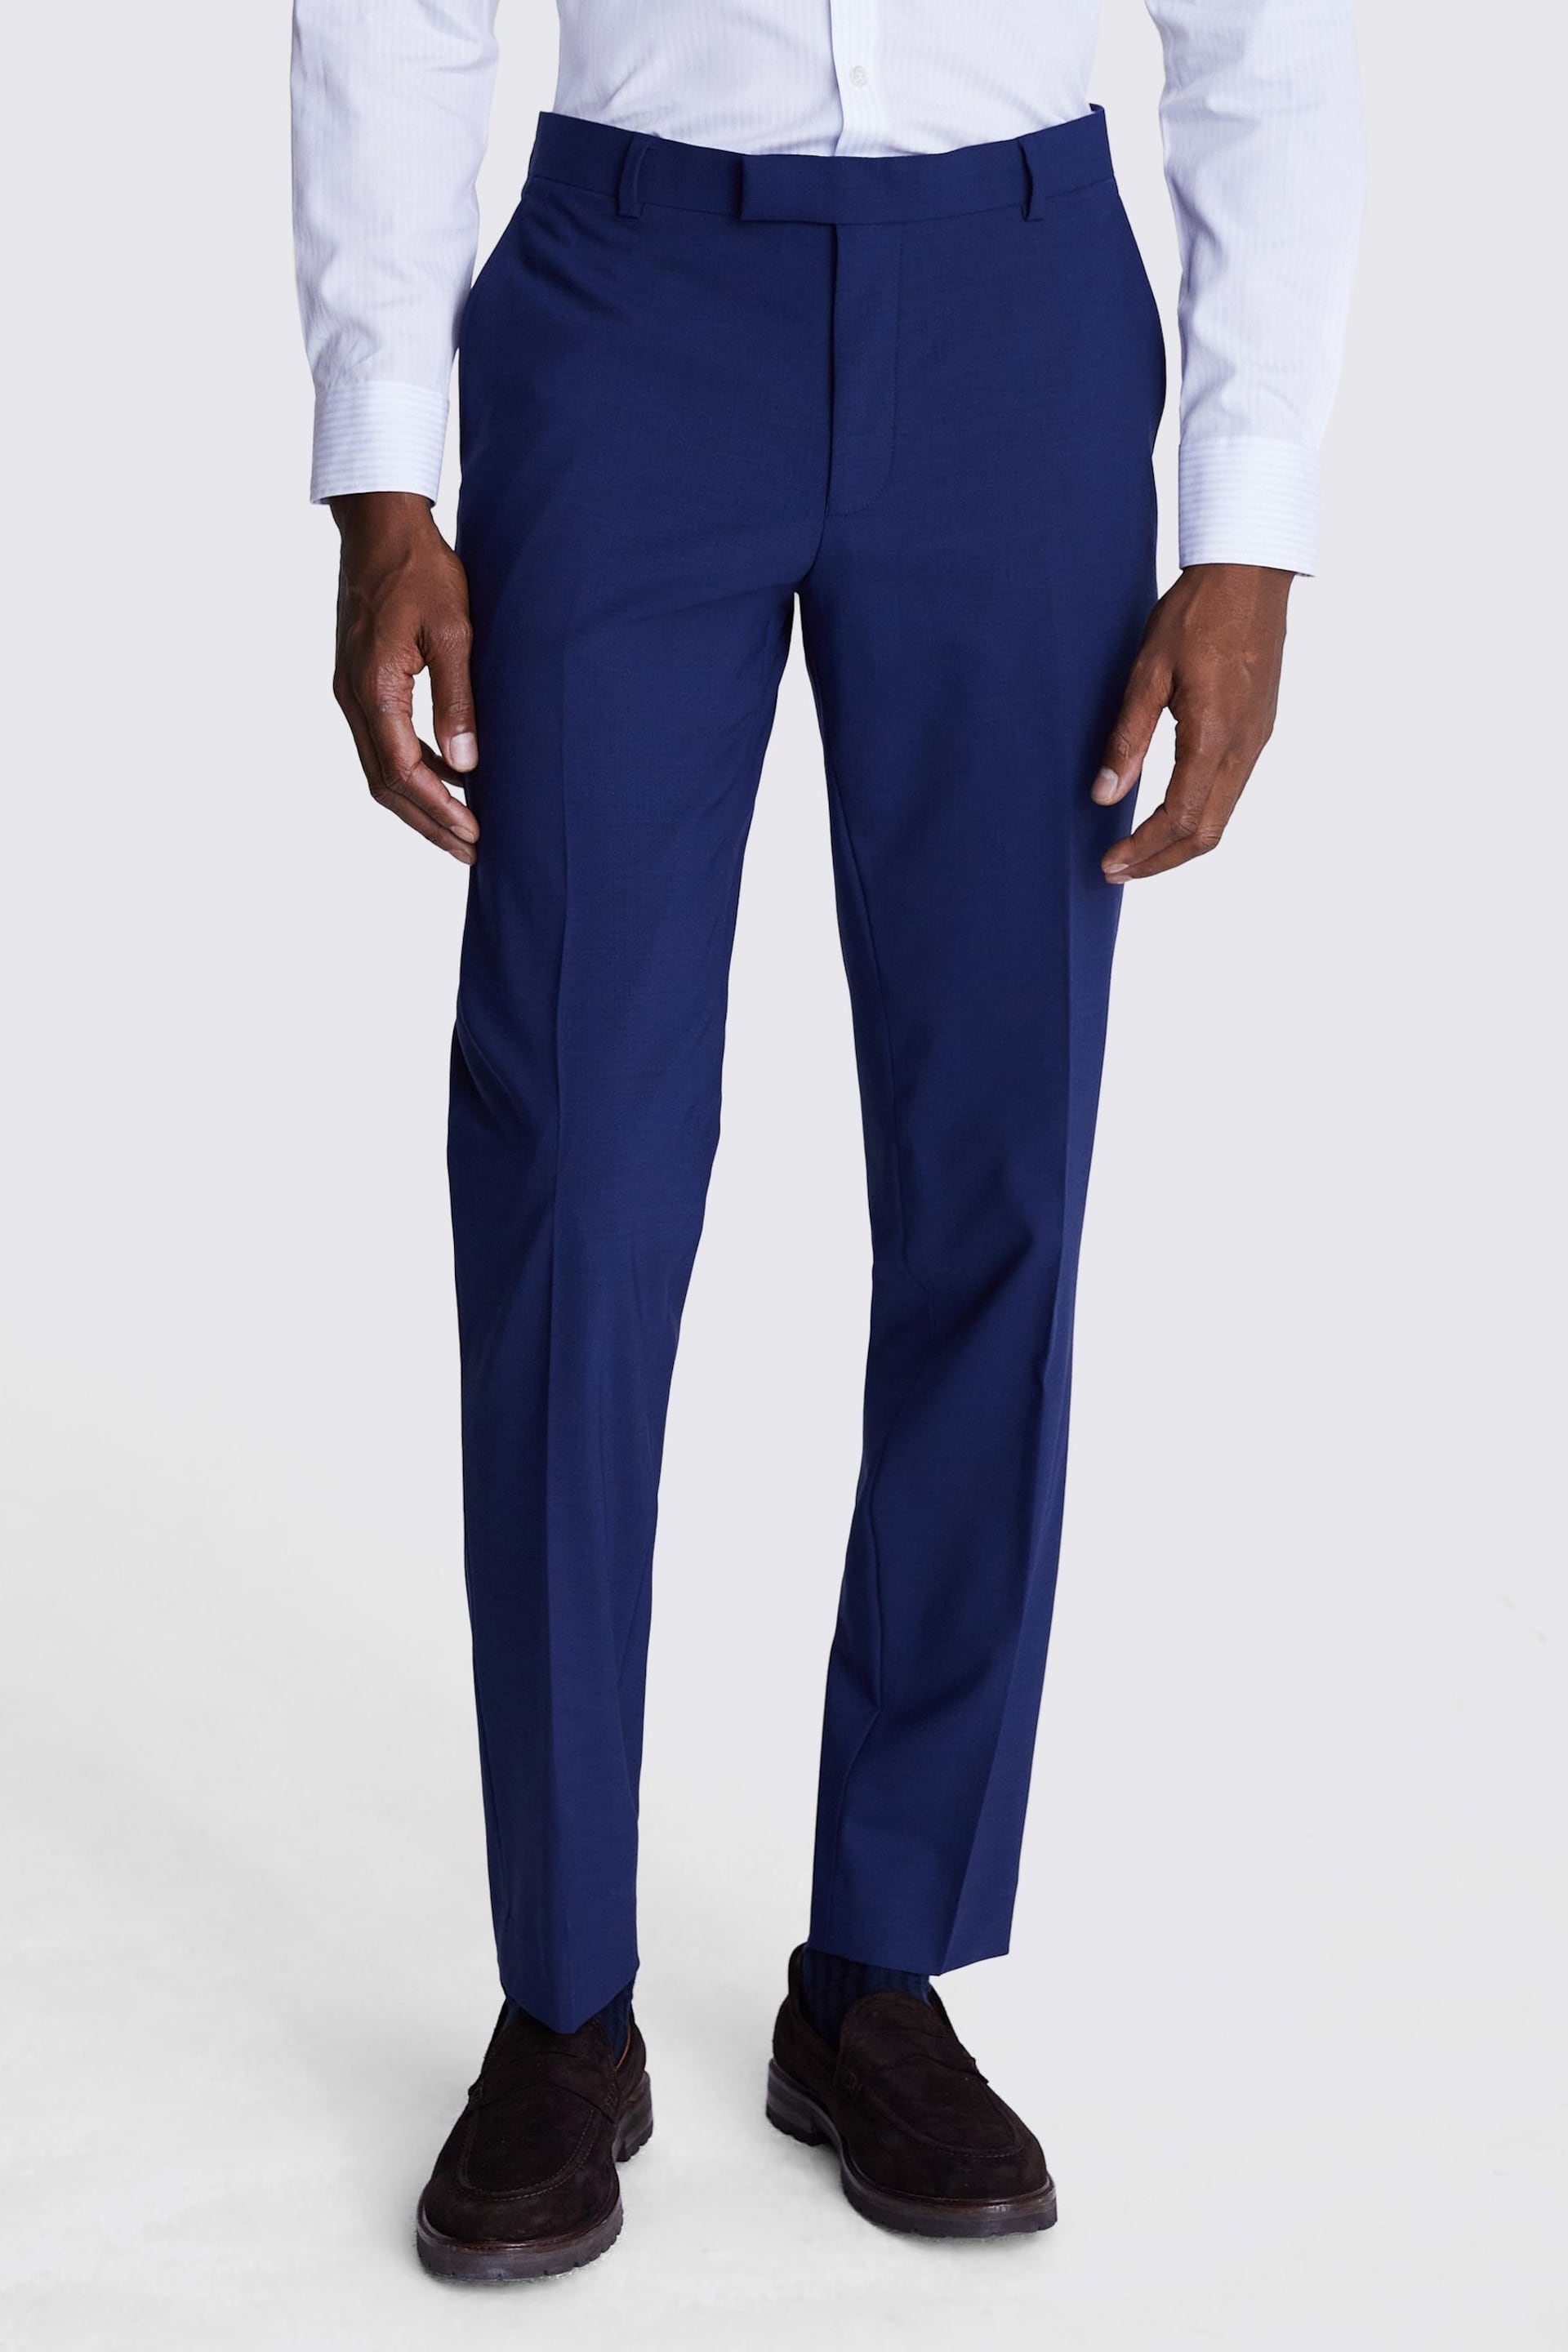 MOSS Blue Slim Fit Trousers - Image 1 of 3